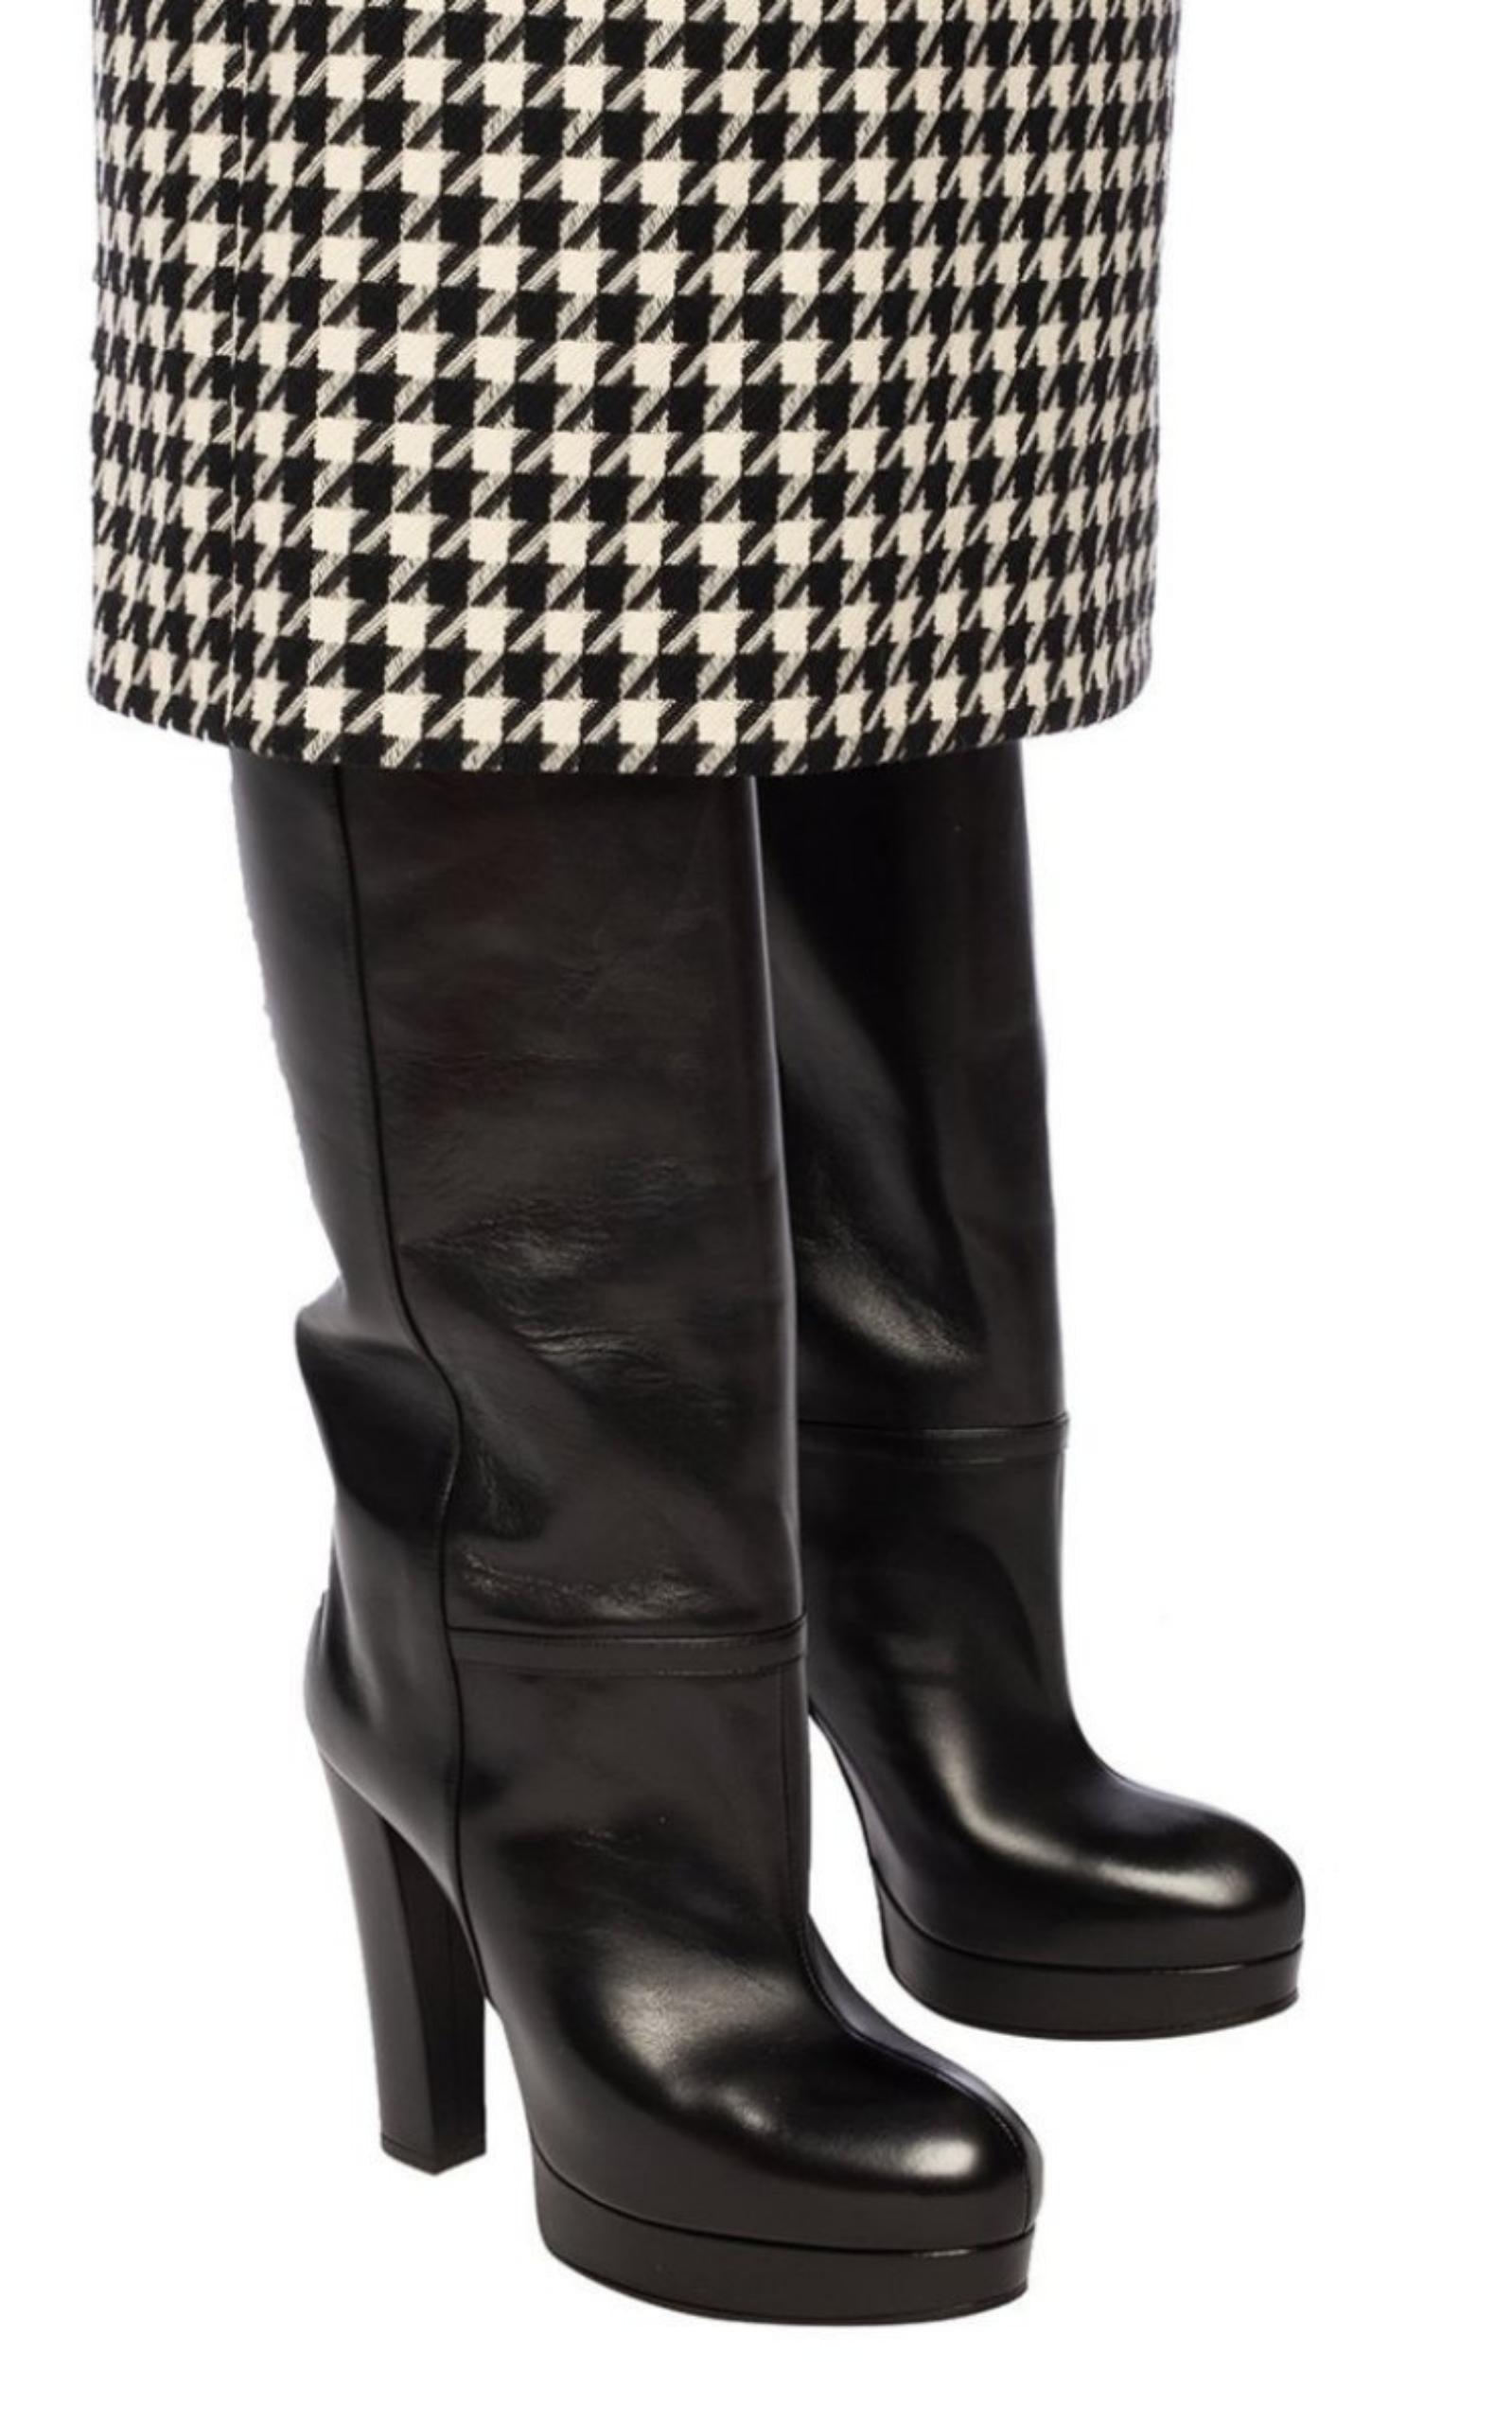 Gucci Knee-High Boots for Women